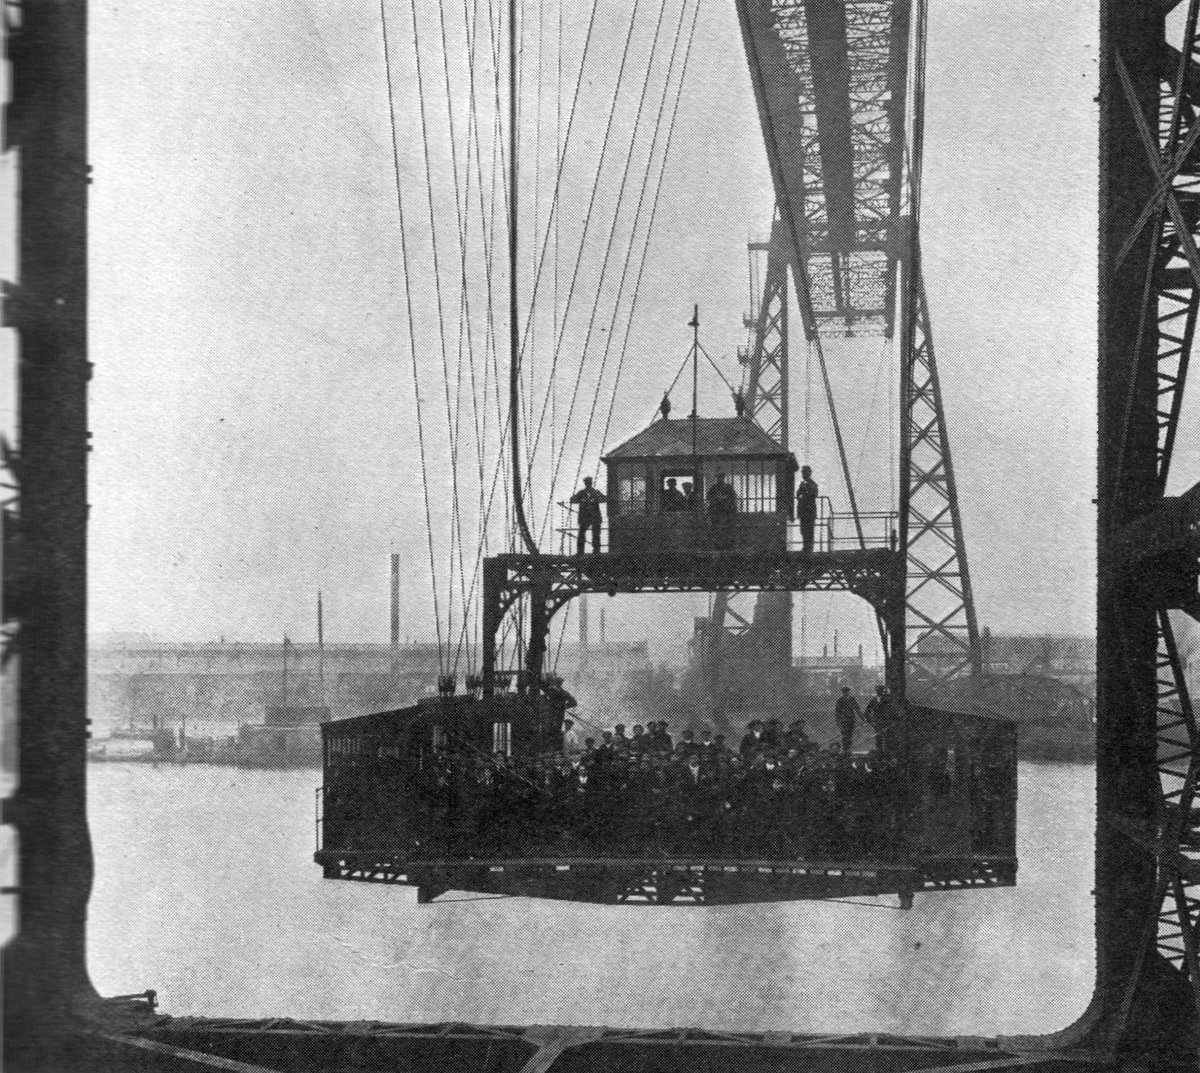 2/19 They are the passenger end of a very long tradition of wire rope haulage, a key component of the industrial revolution with numerous inclined planes in every industrial location as well as aerial ropeways, blondins, chain ferries & transporter bridges  #BIAG20